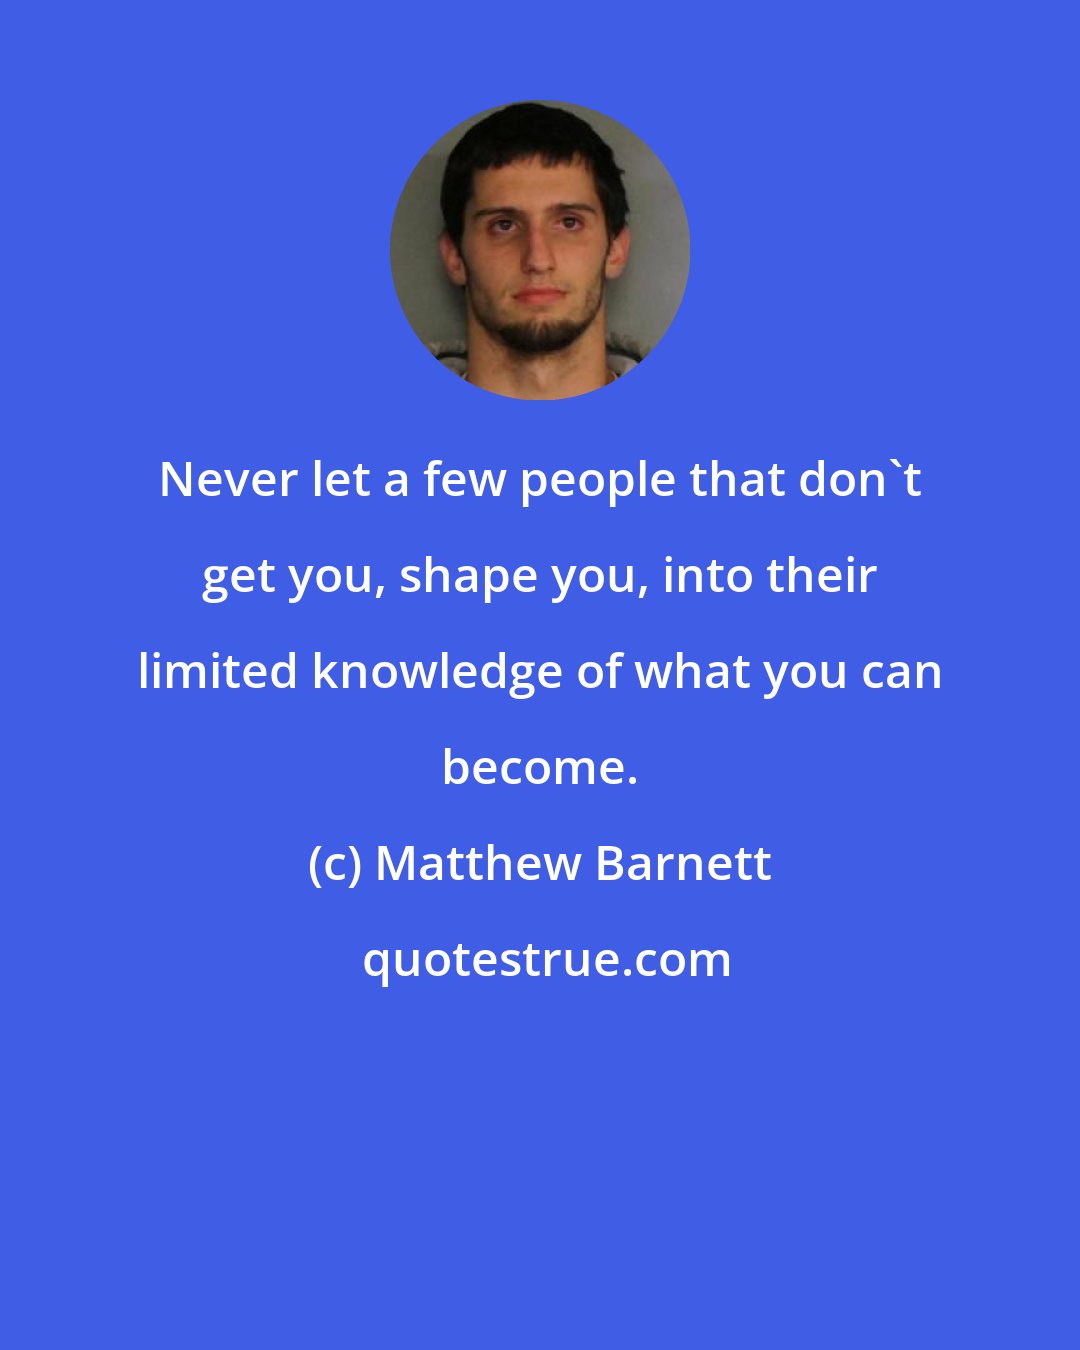 Matthew Barnett: Never let a few people that don't get you, shape you, into their limited knowledge of what you can become.